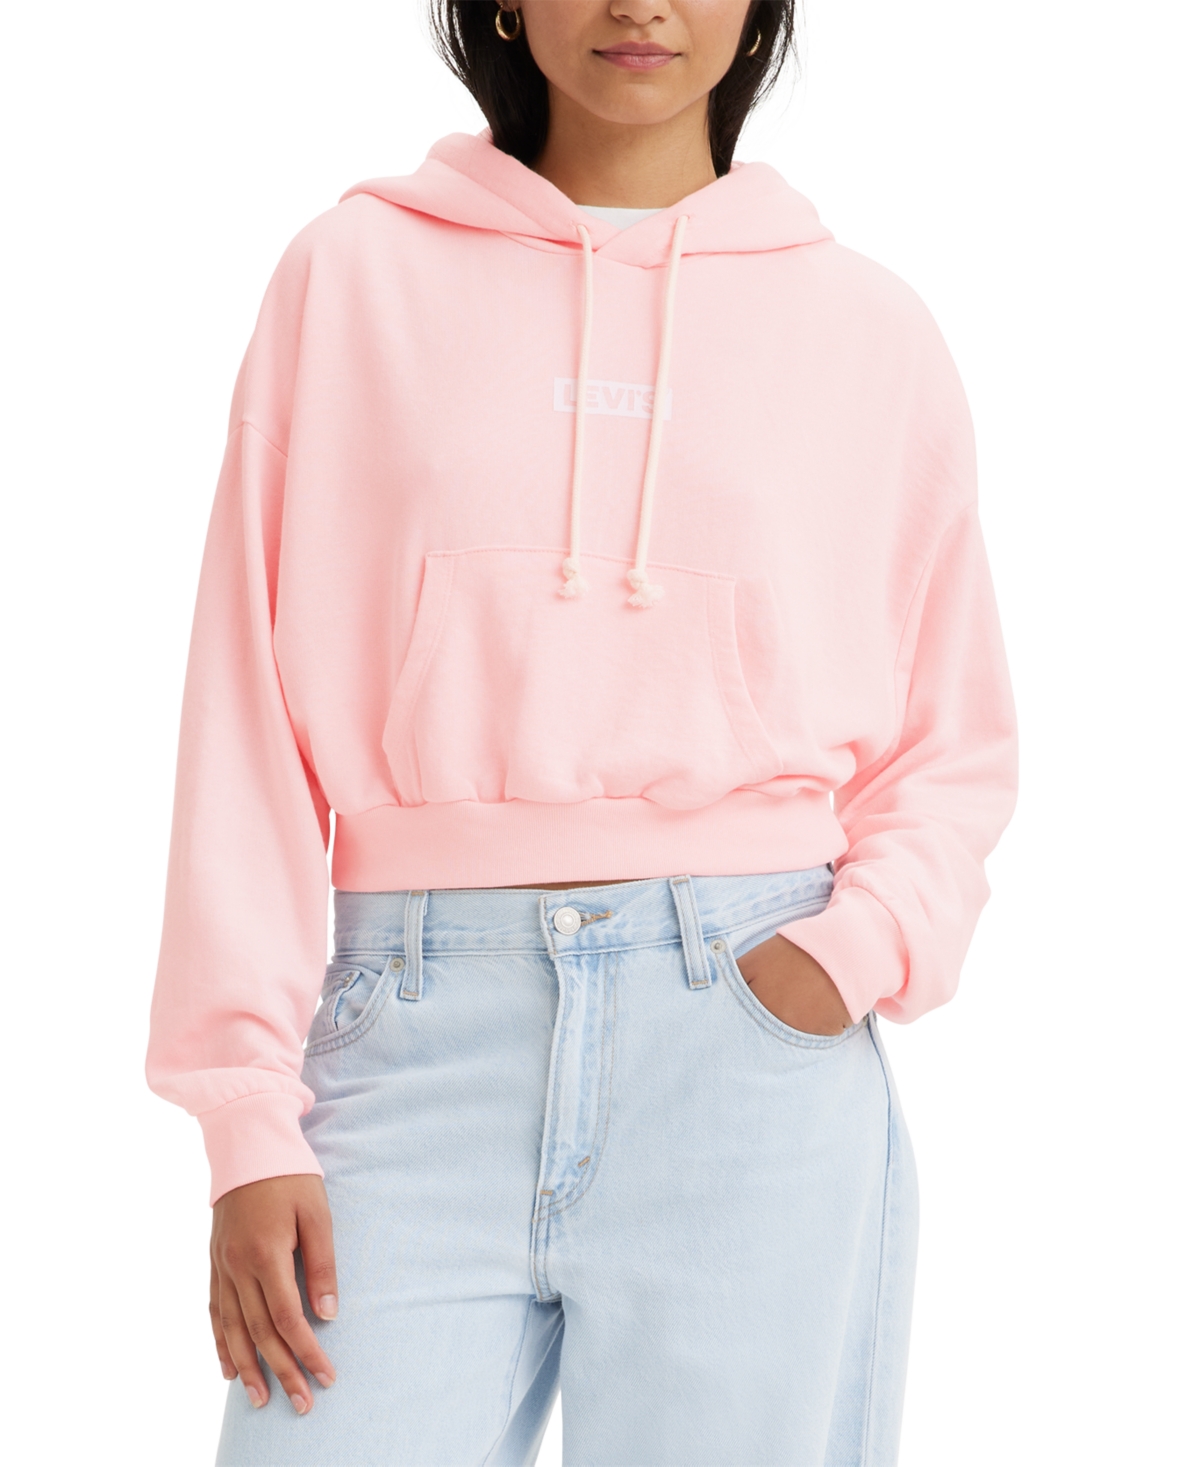  Levi's Women's Graphic Laundry Day Hoodie